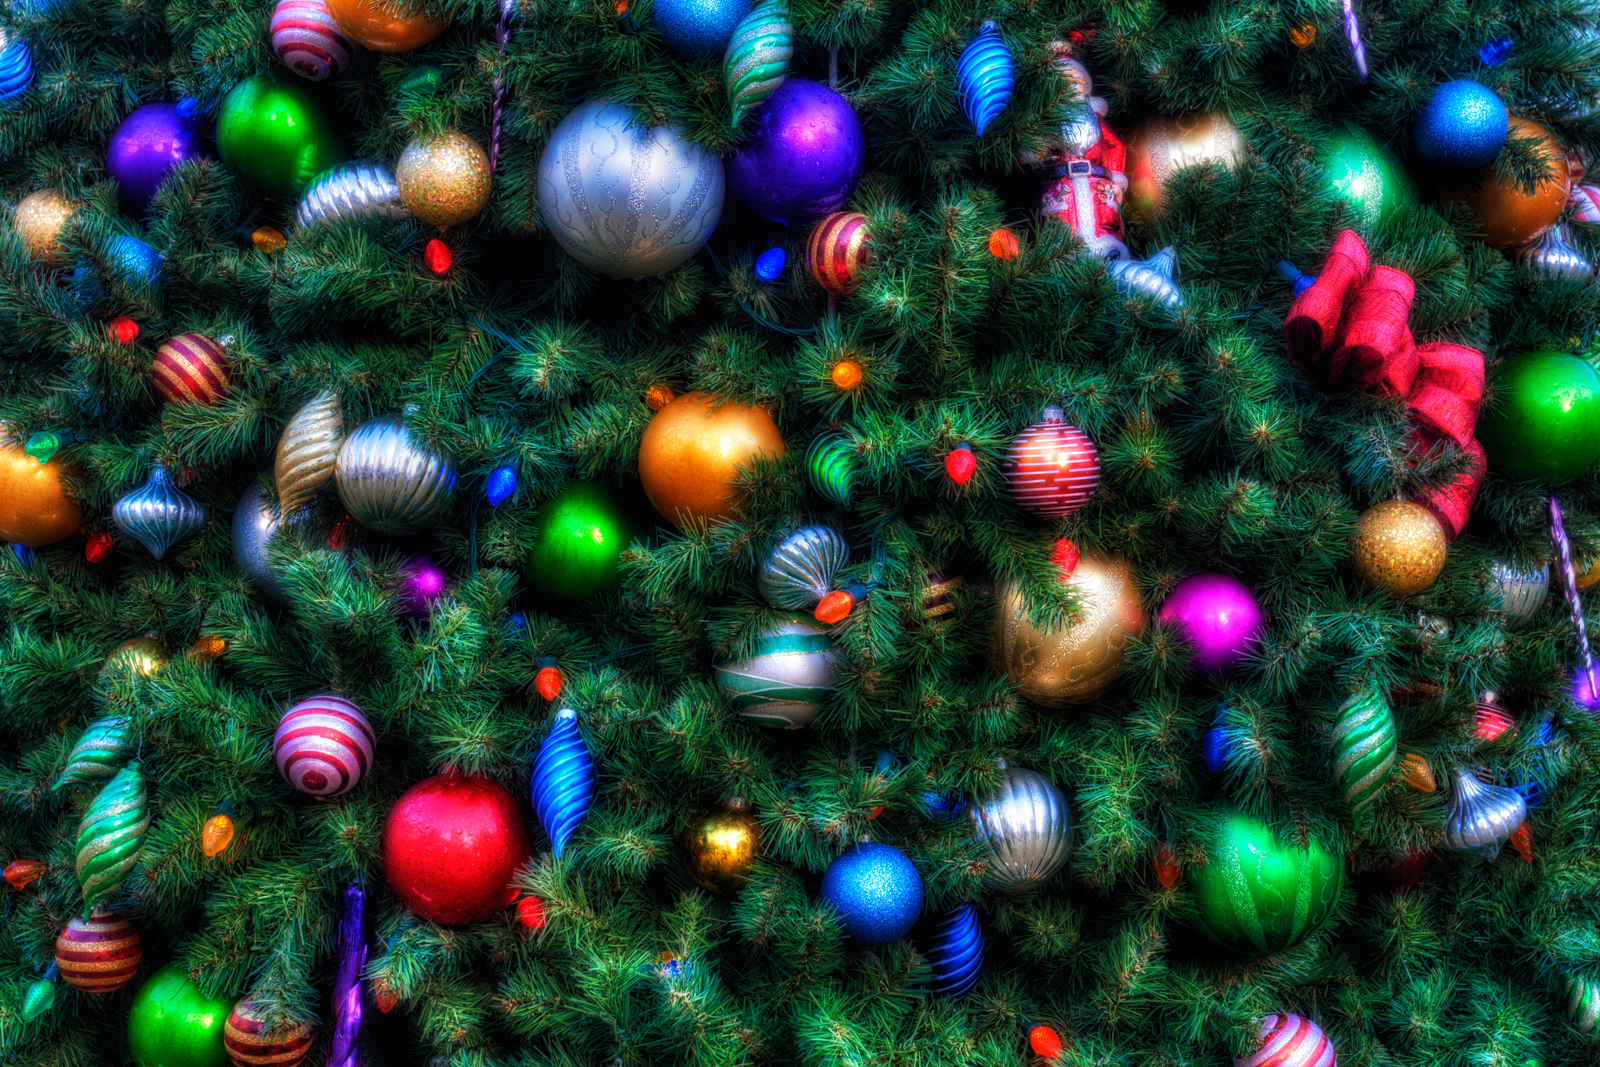 Ornaments and Lights